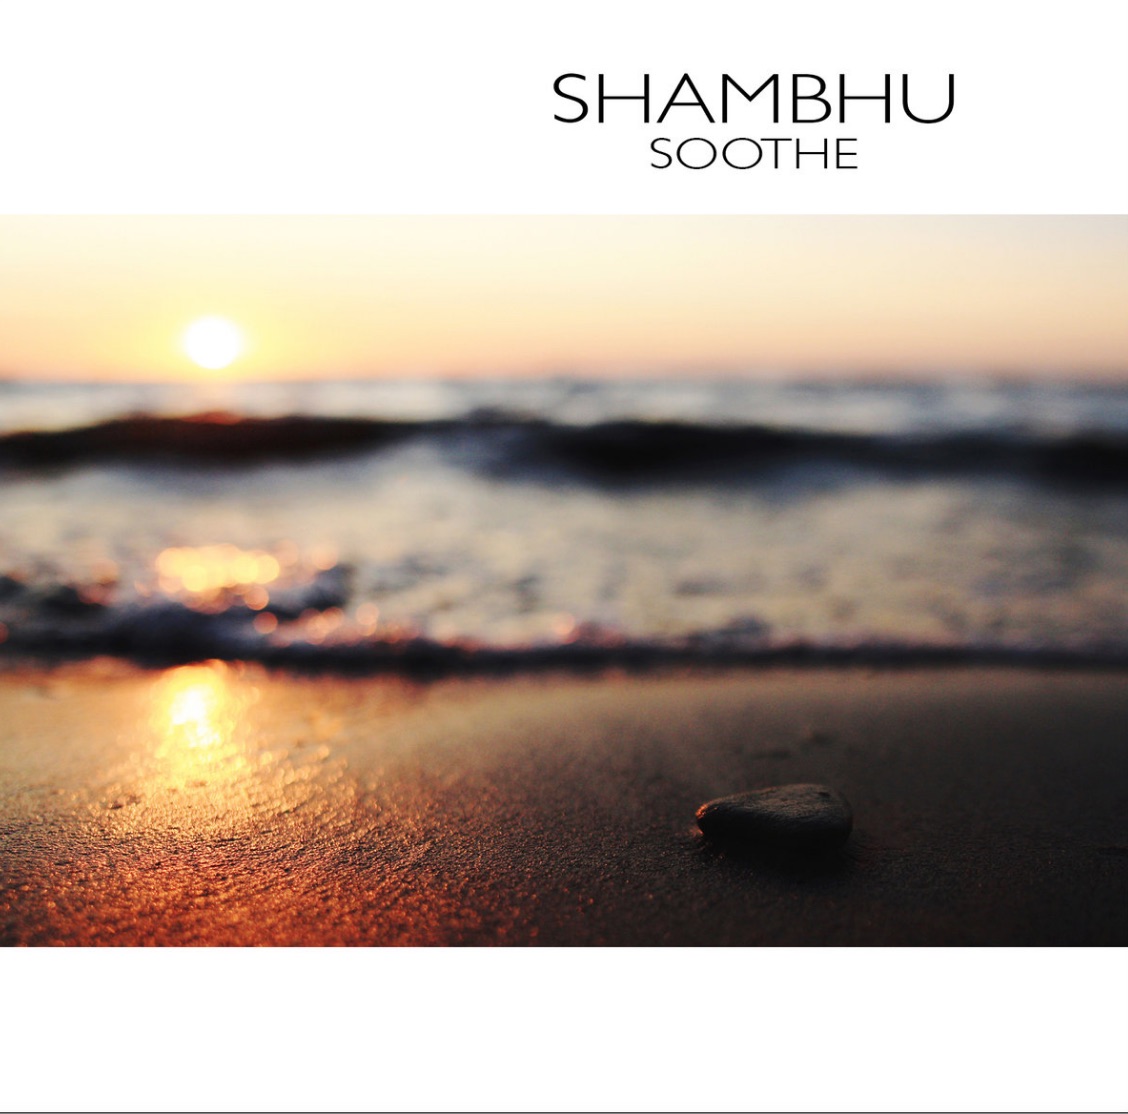 Shambhu released Soothe CD in February this year